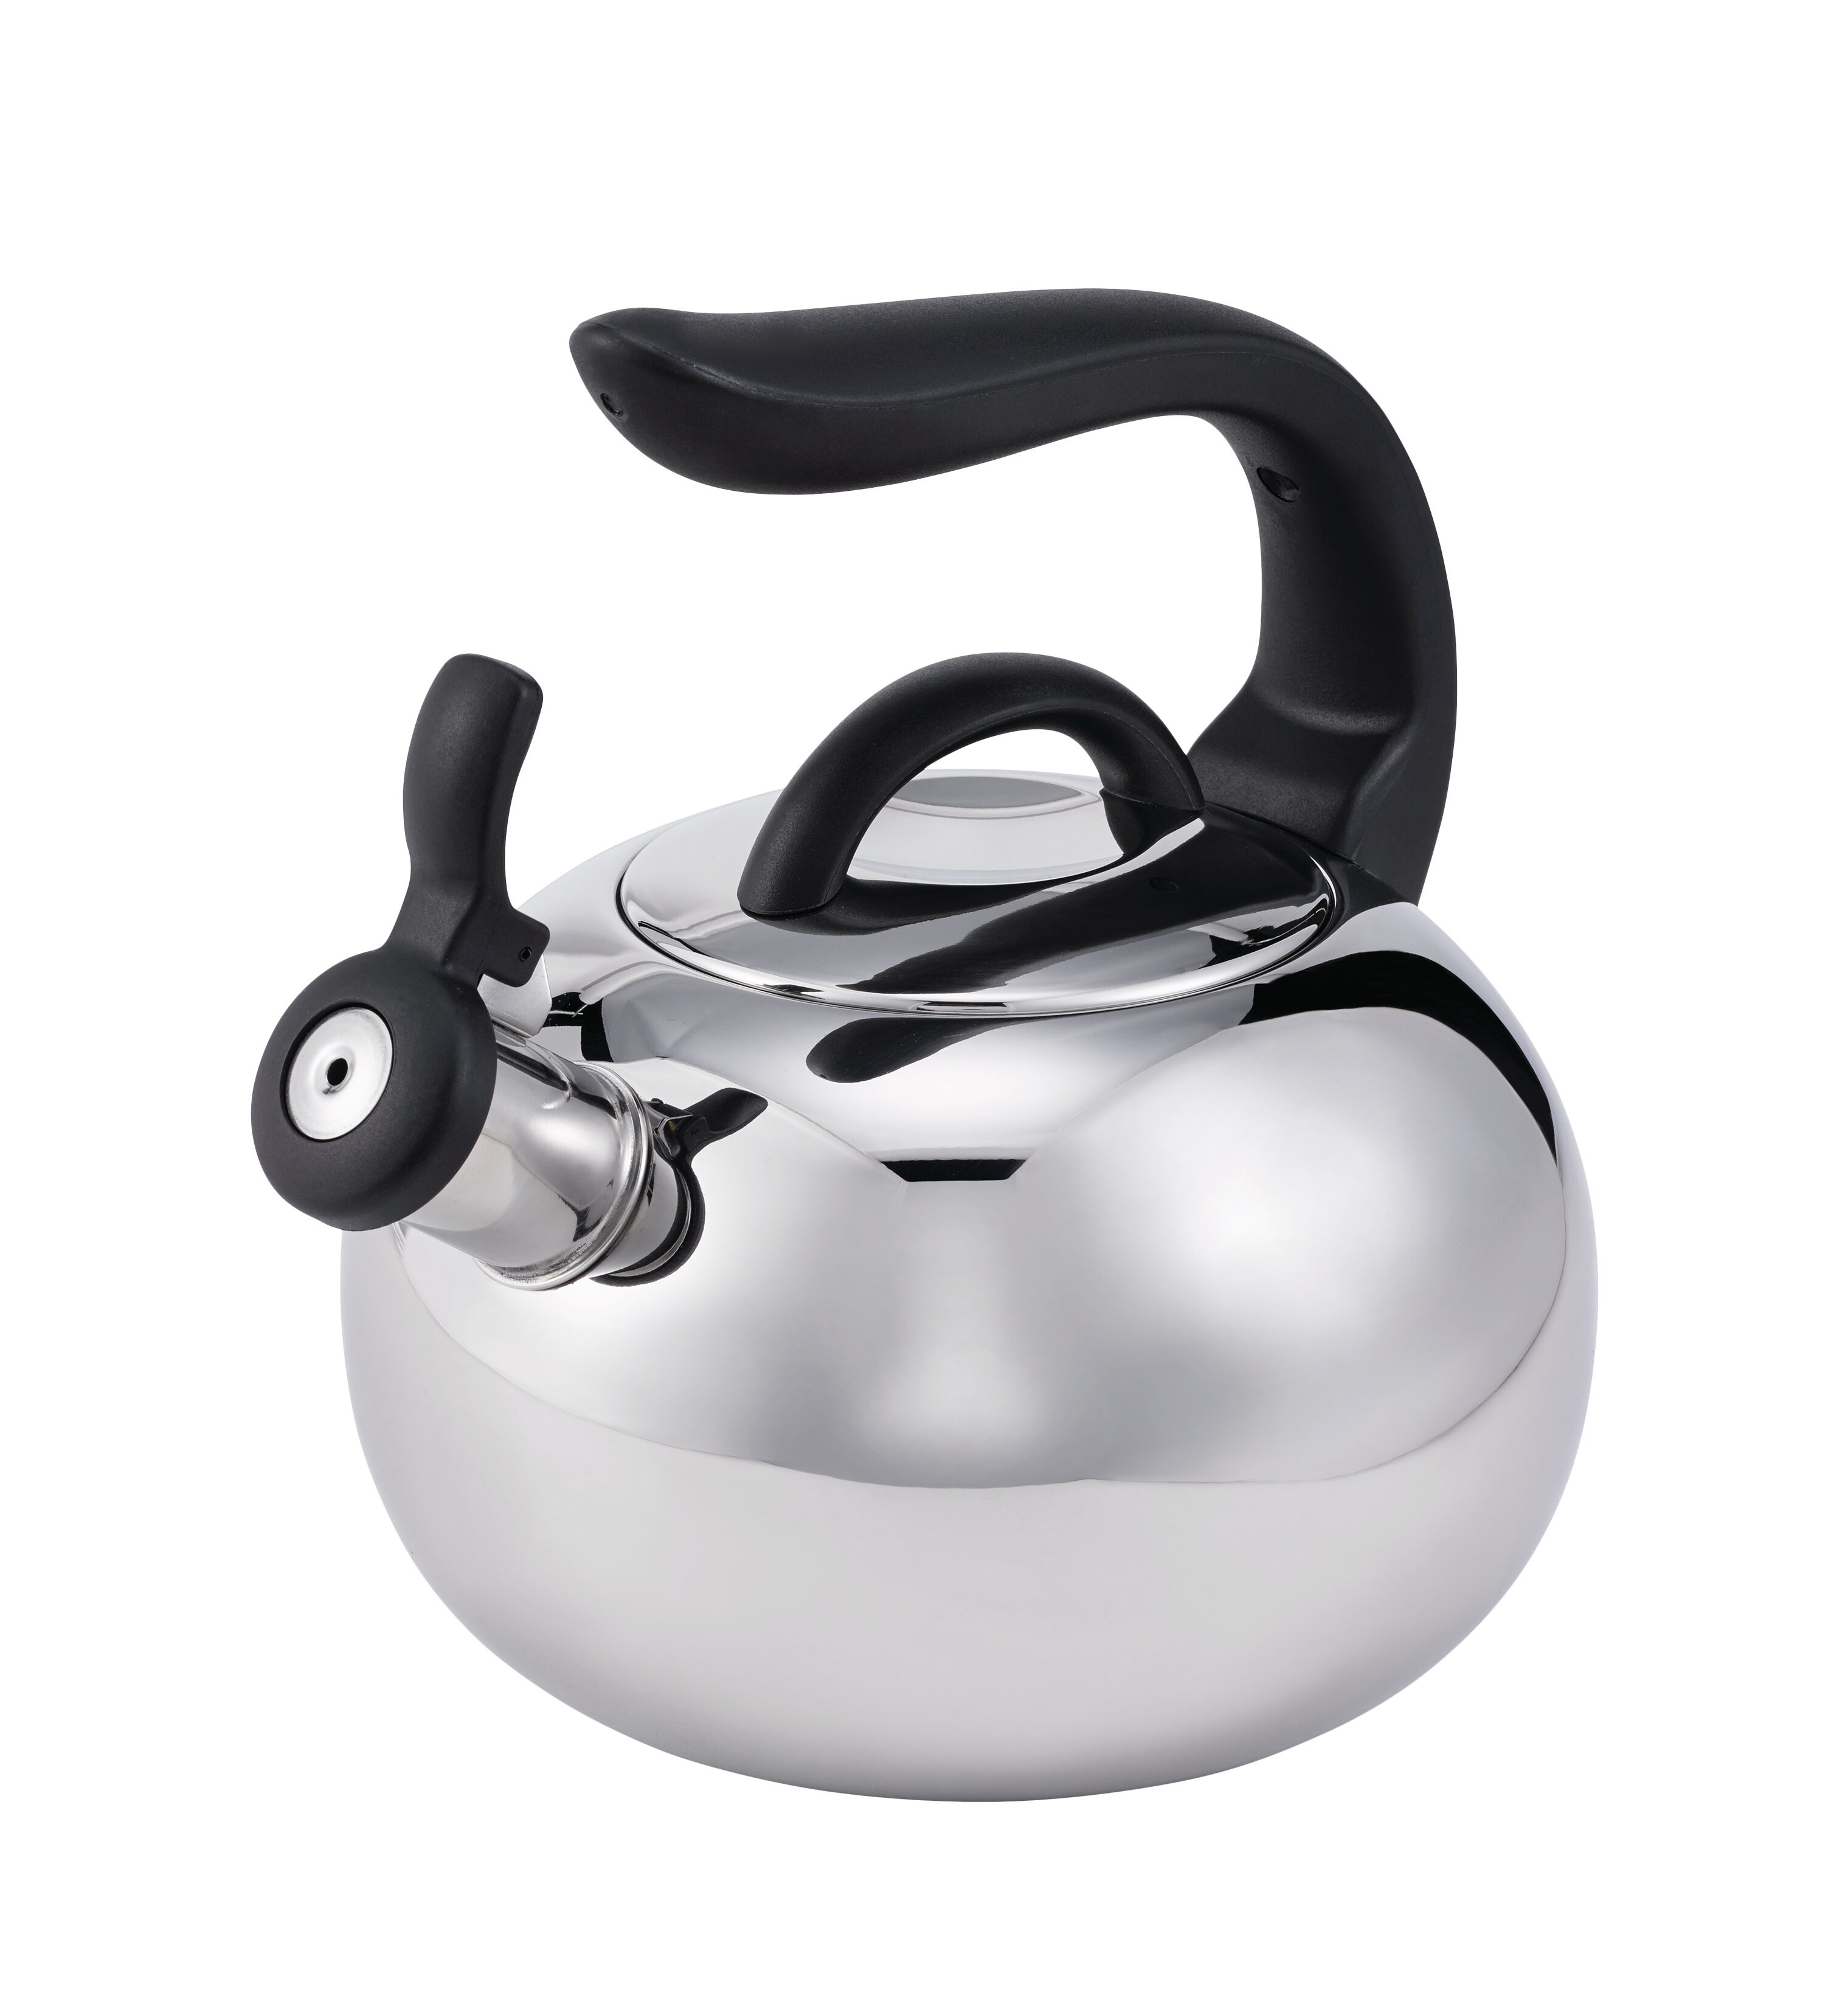 hot Handle and Loud Whistle with Filter 1L DOITOOL Stainless Steel Whistling Tea Kettle Tea Pot Stovetop Anti